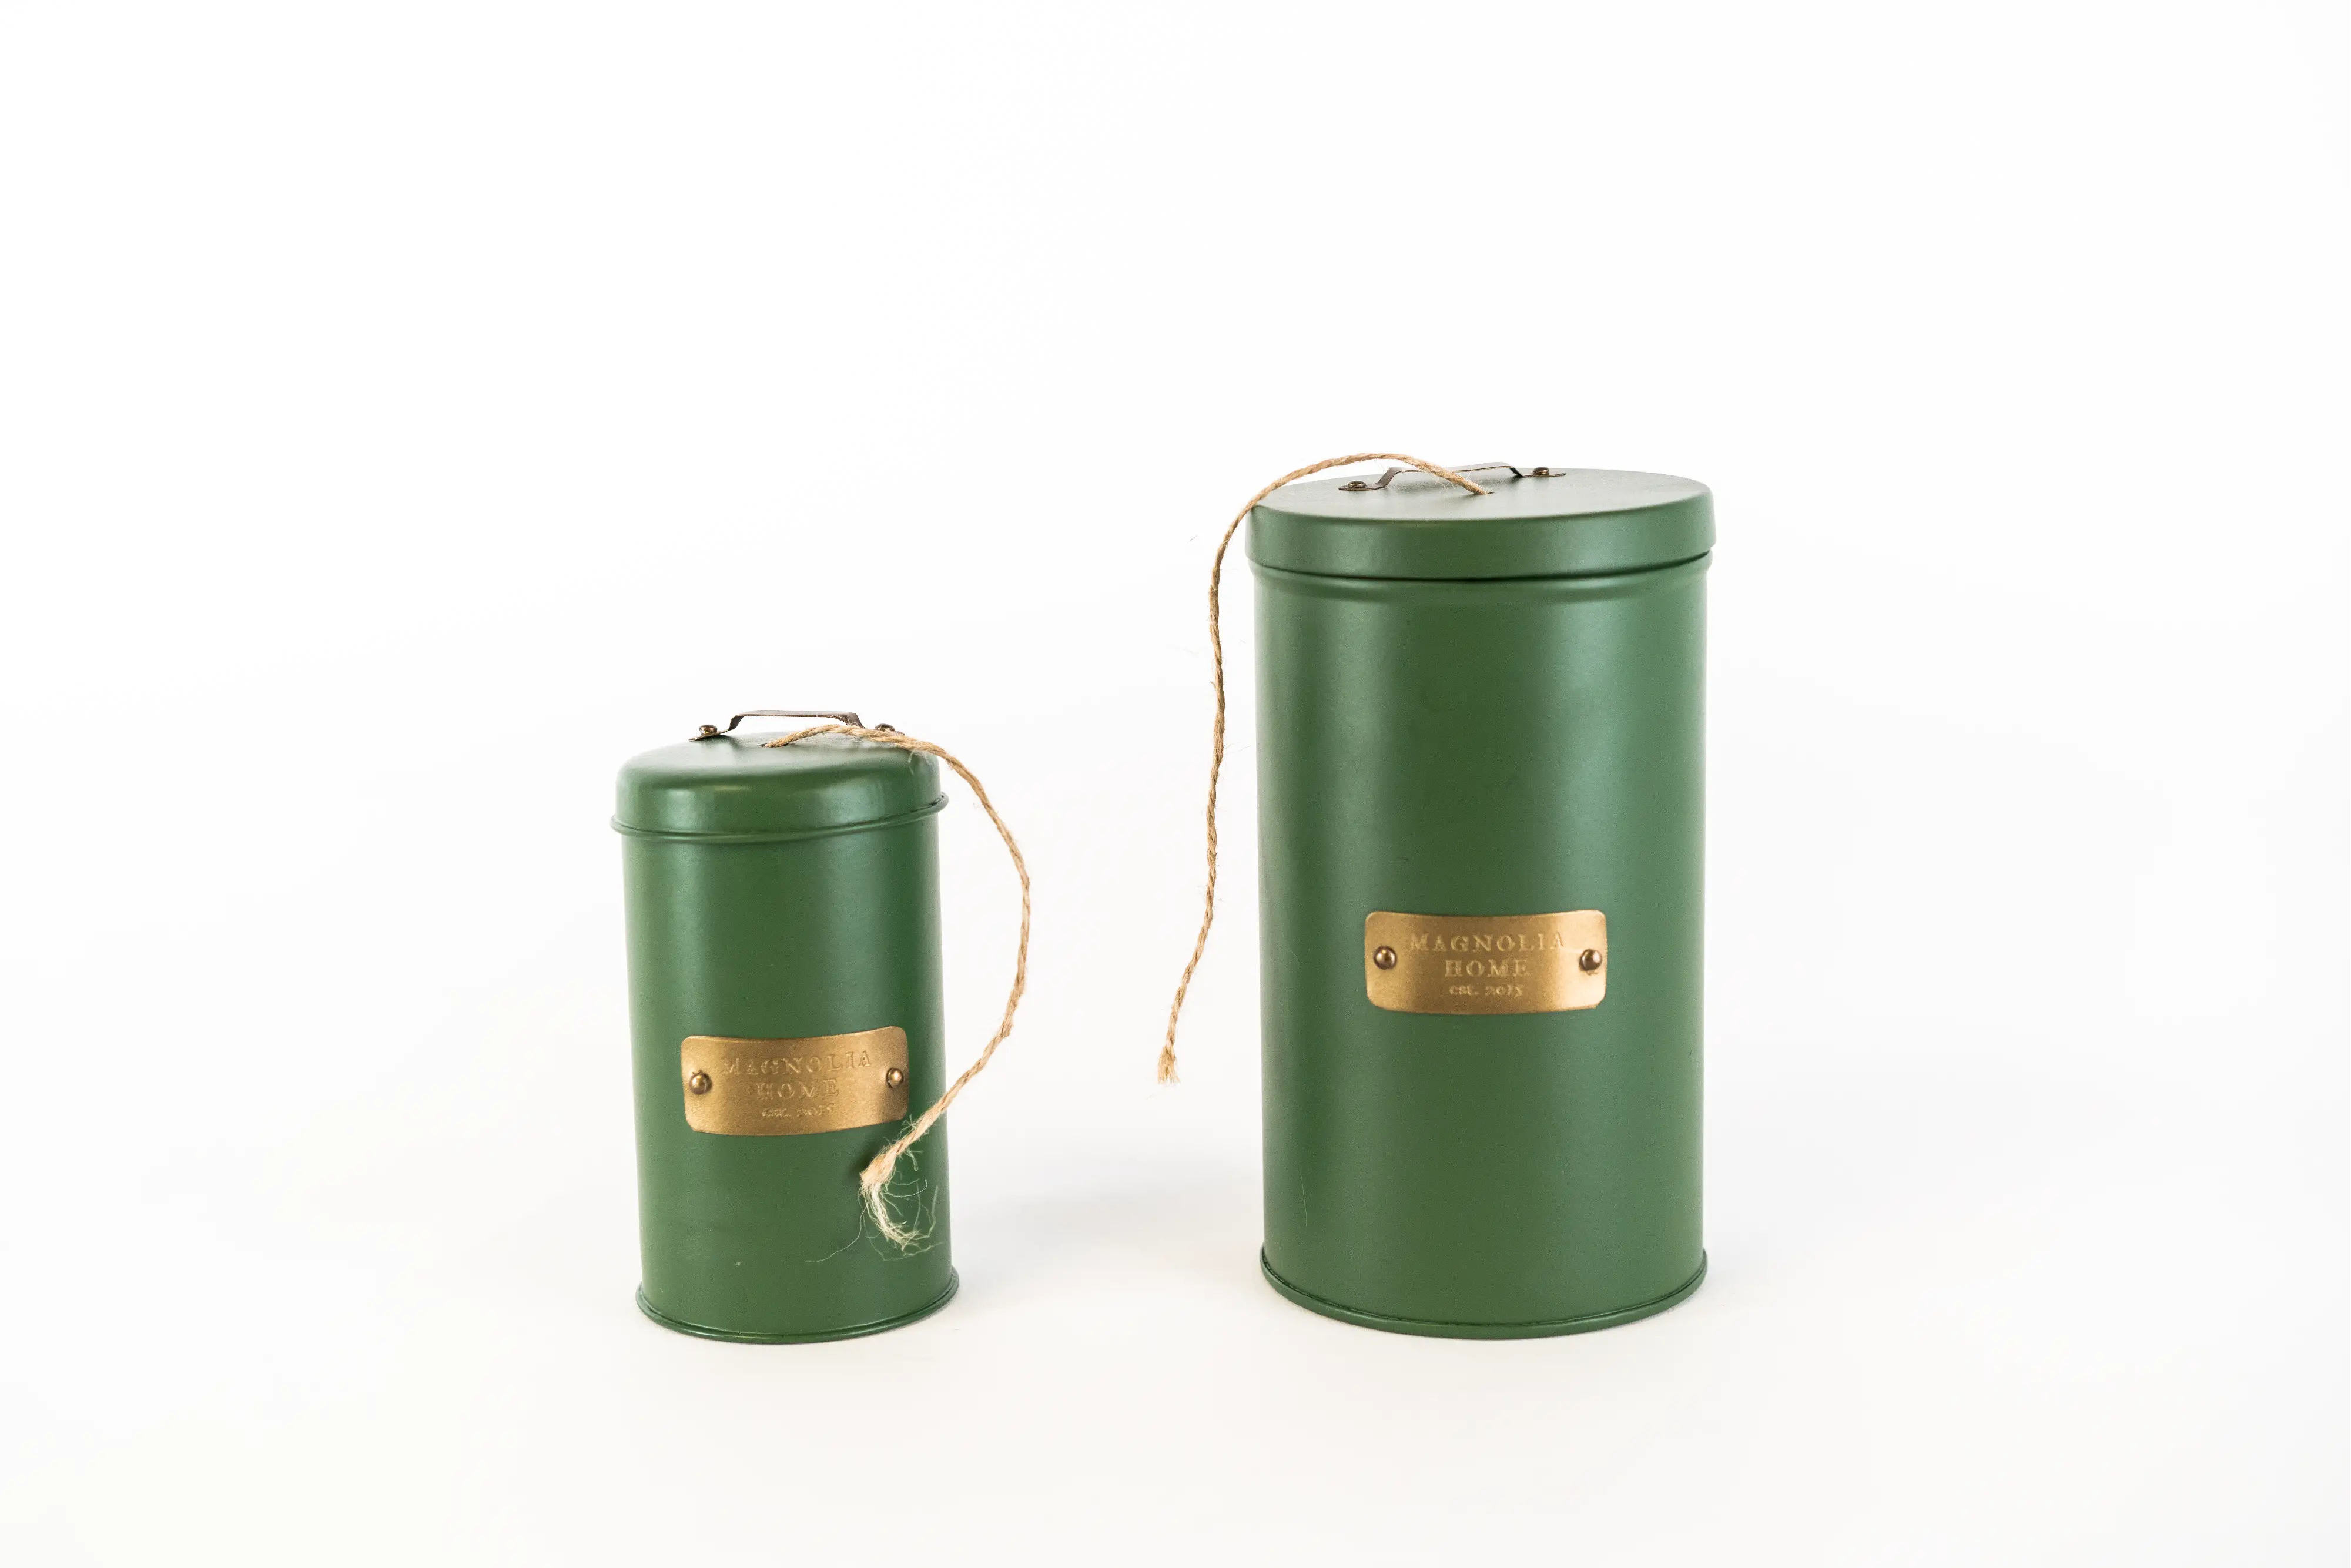 https://static.rcwilley.com/products/112019706/Magnolia-Home-Furniture-4-Inch-Green-and-Brass-Metal-Canister-rcwilley-image1.webp